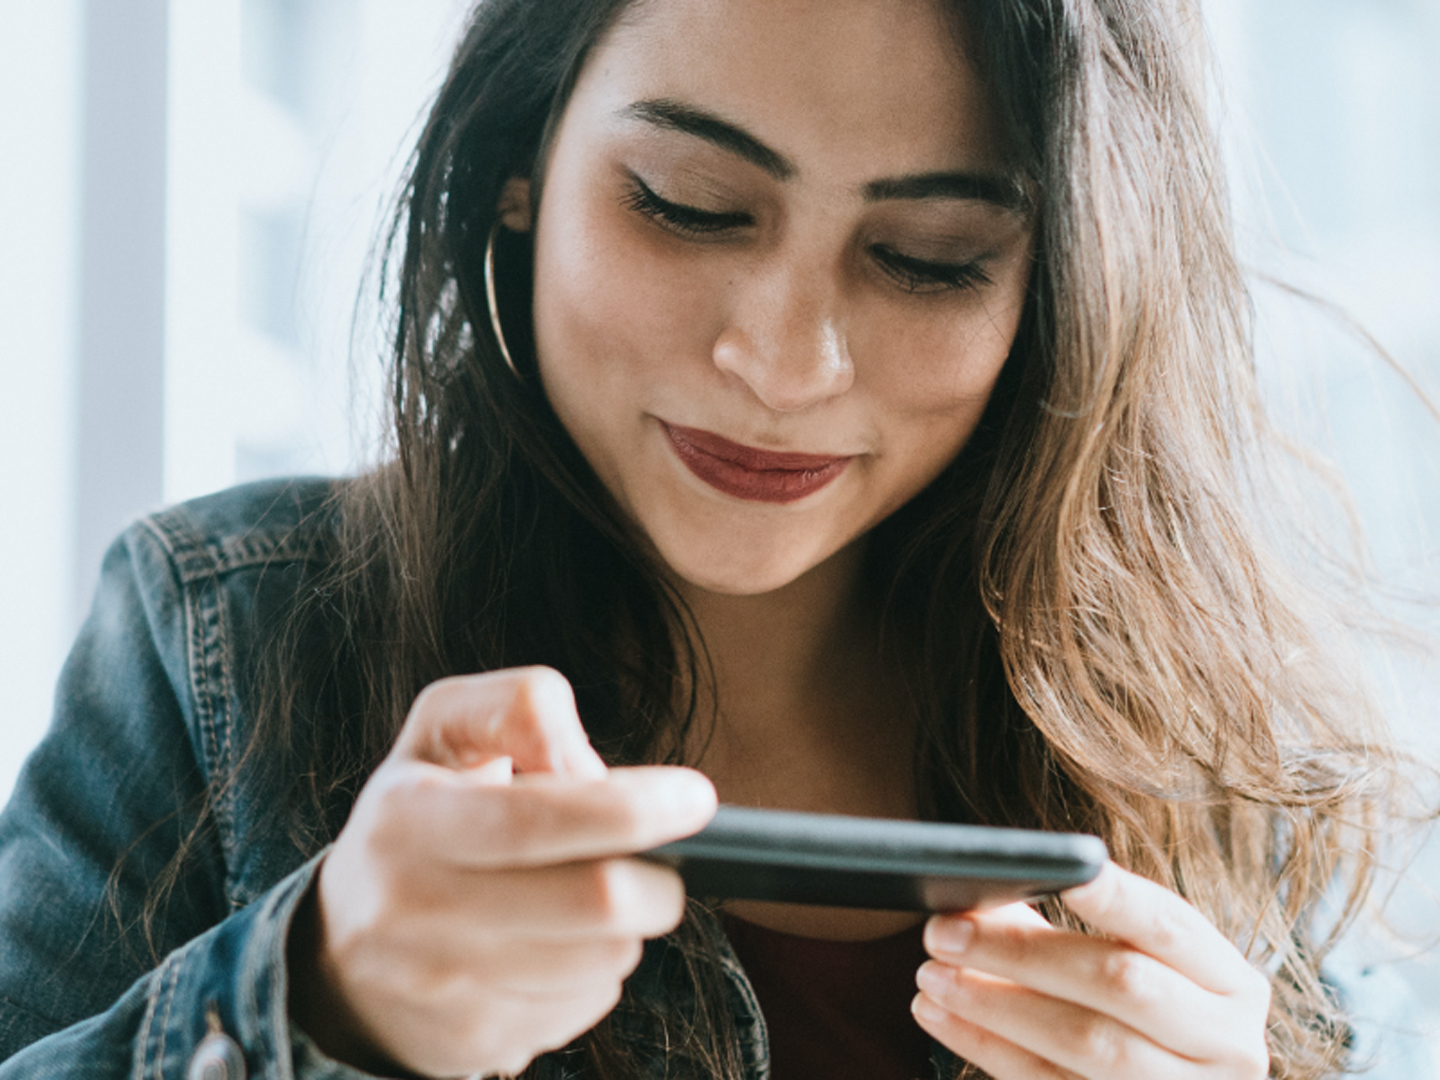 Woman looking down at mobile phone and smiling